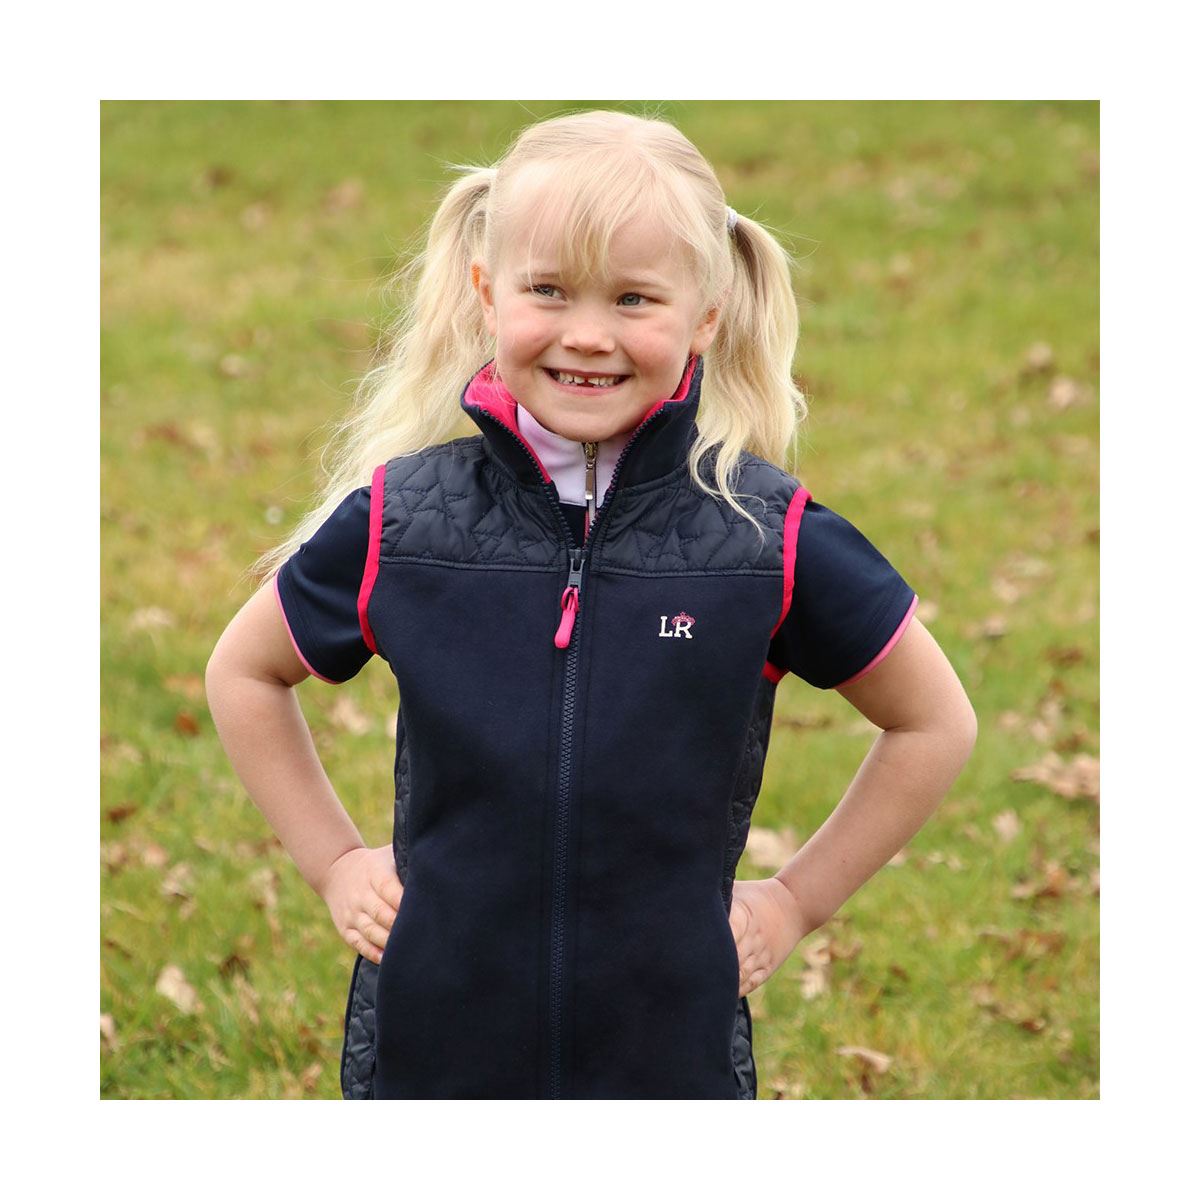 Sophia Gilet by Little Rider - Just Horse Riders